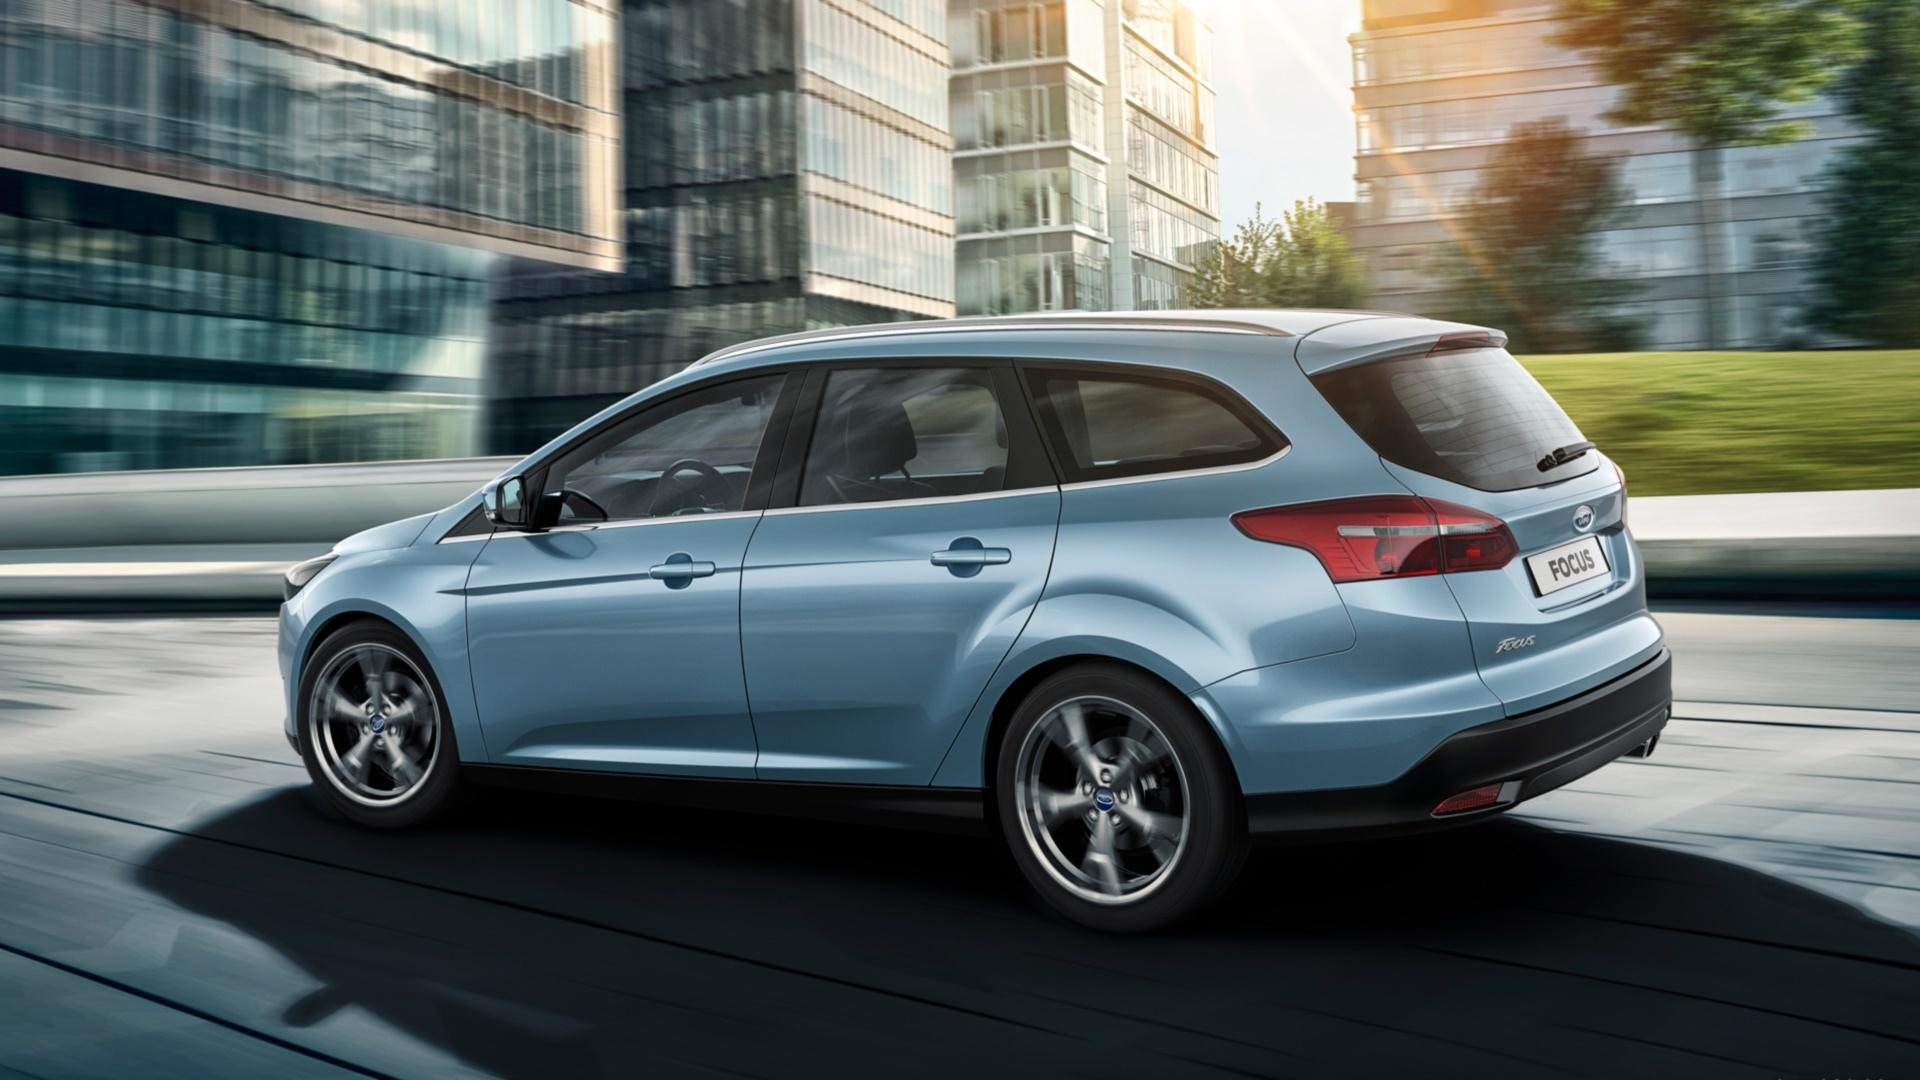 2015 Ford Focus Wagon wallpapers HD quality